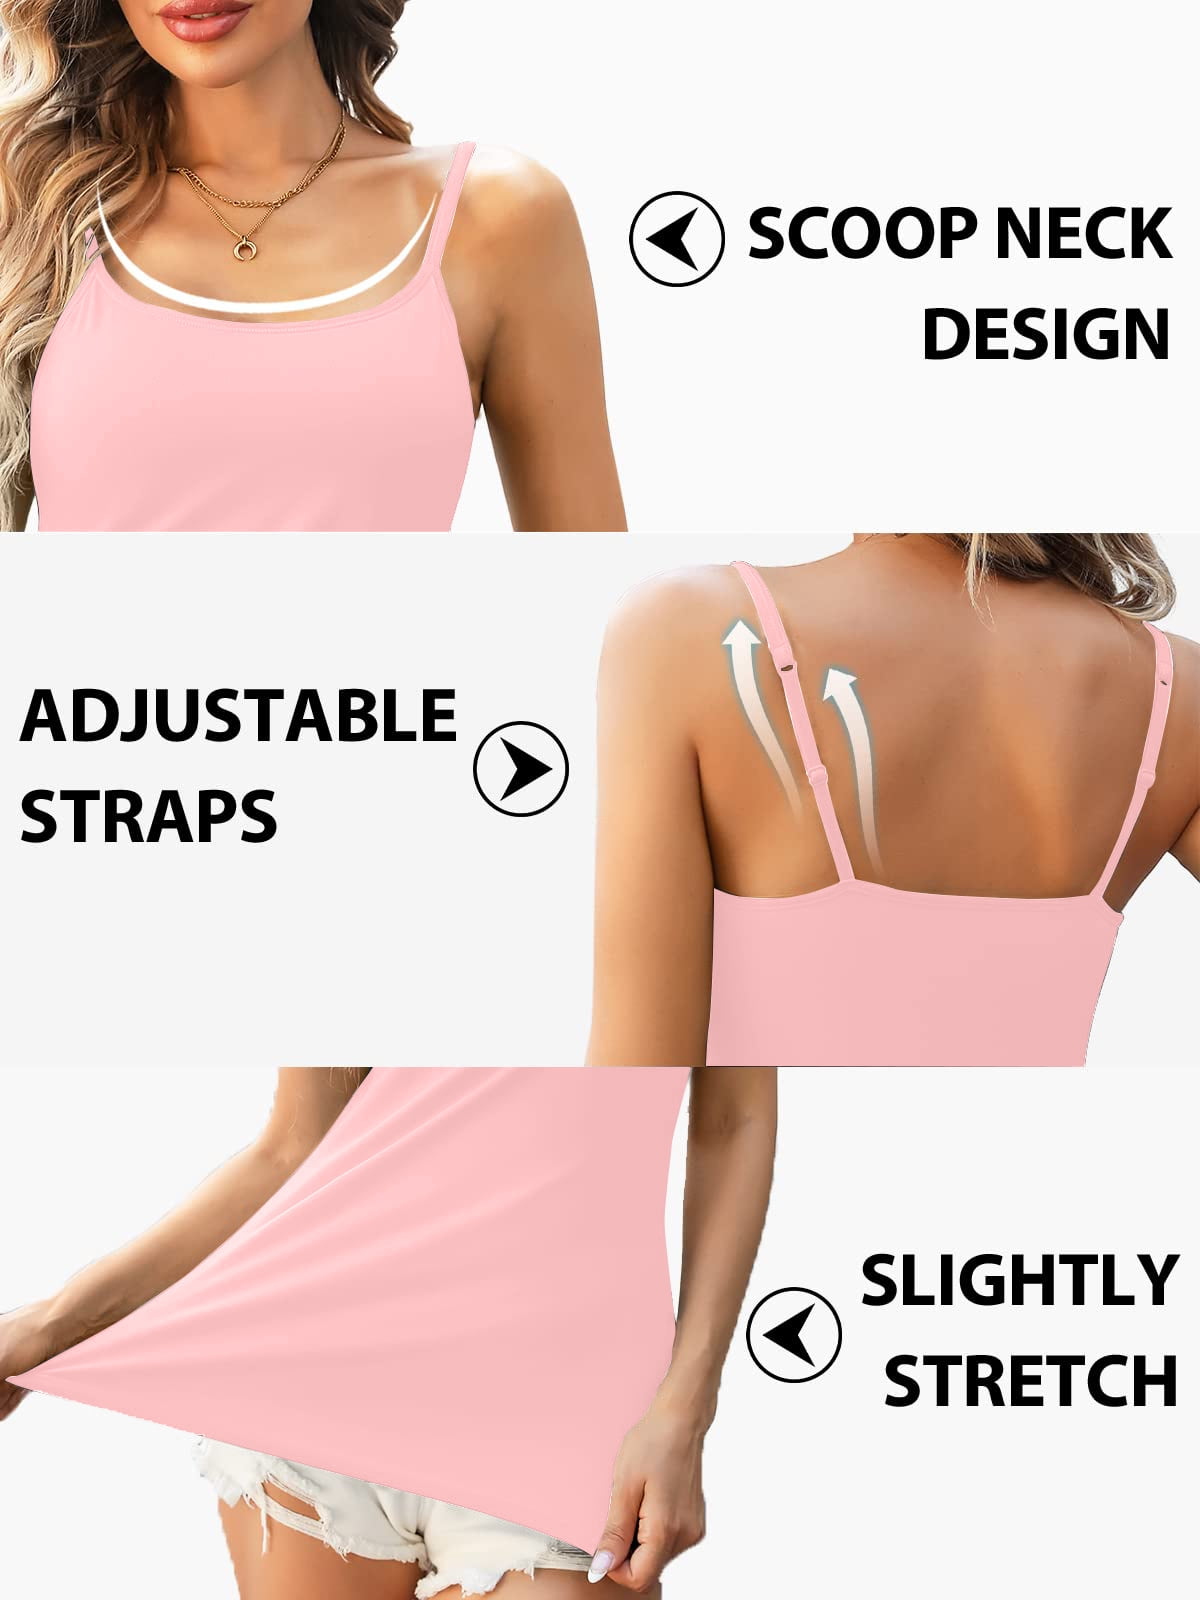 Padded Bra Tank Top Women Modal Spaghetti Strap Camisole With Built In Bra  Solid Cami Top Female Tops Vest Home Clothing #3 From Paluo, $55.22